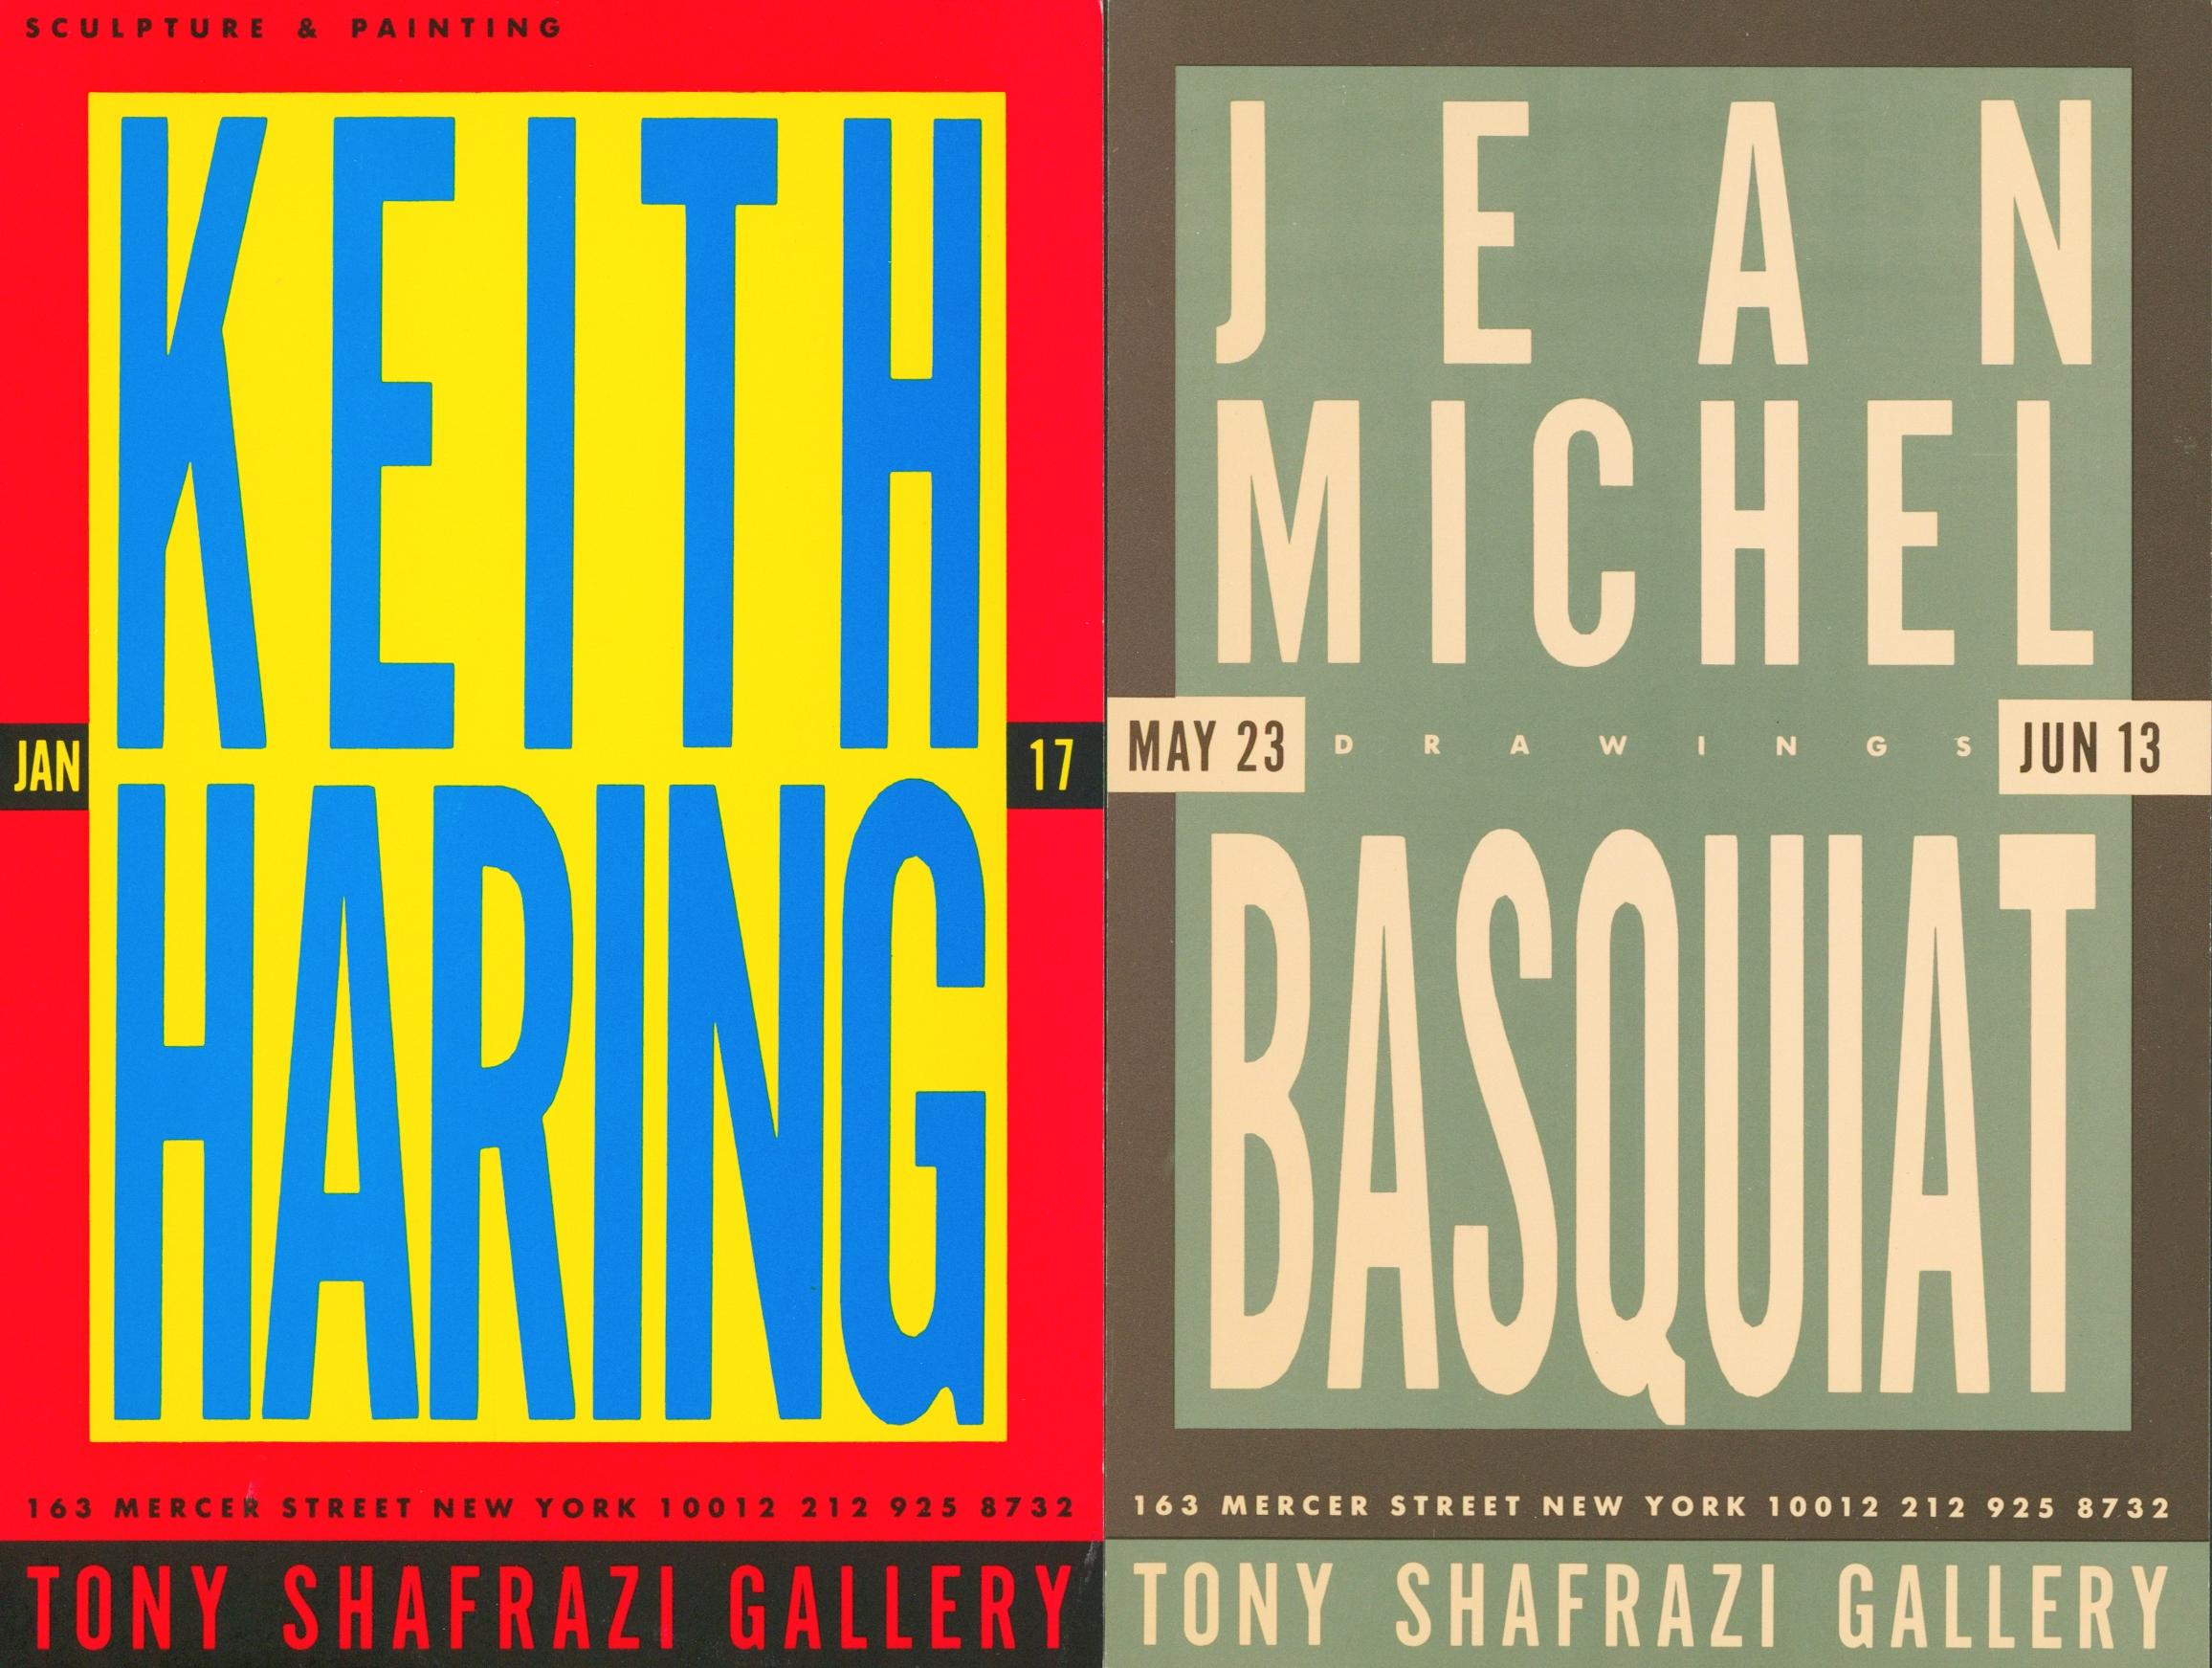 Basquiat Keith Haring at Tony Shafrazi Gallery 1987 (vintage Basquiat Haring)  - Print by after Jean-Michel Basquiat